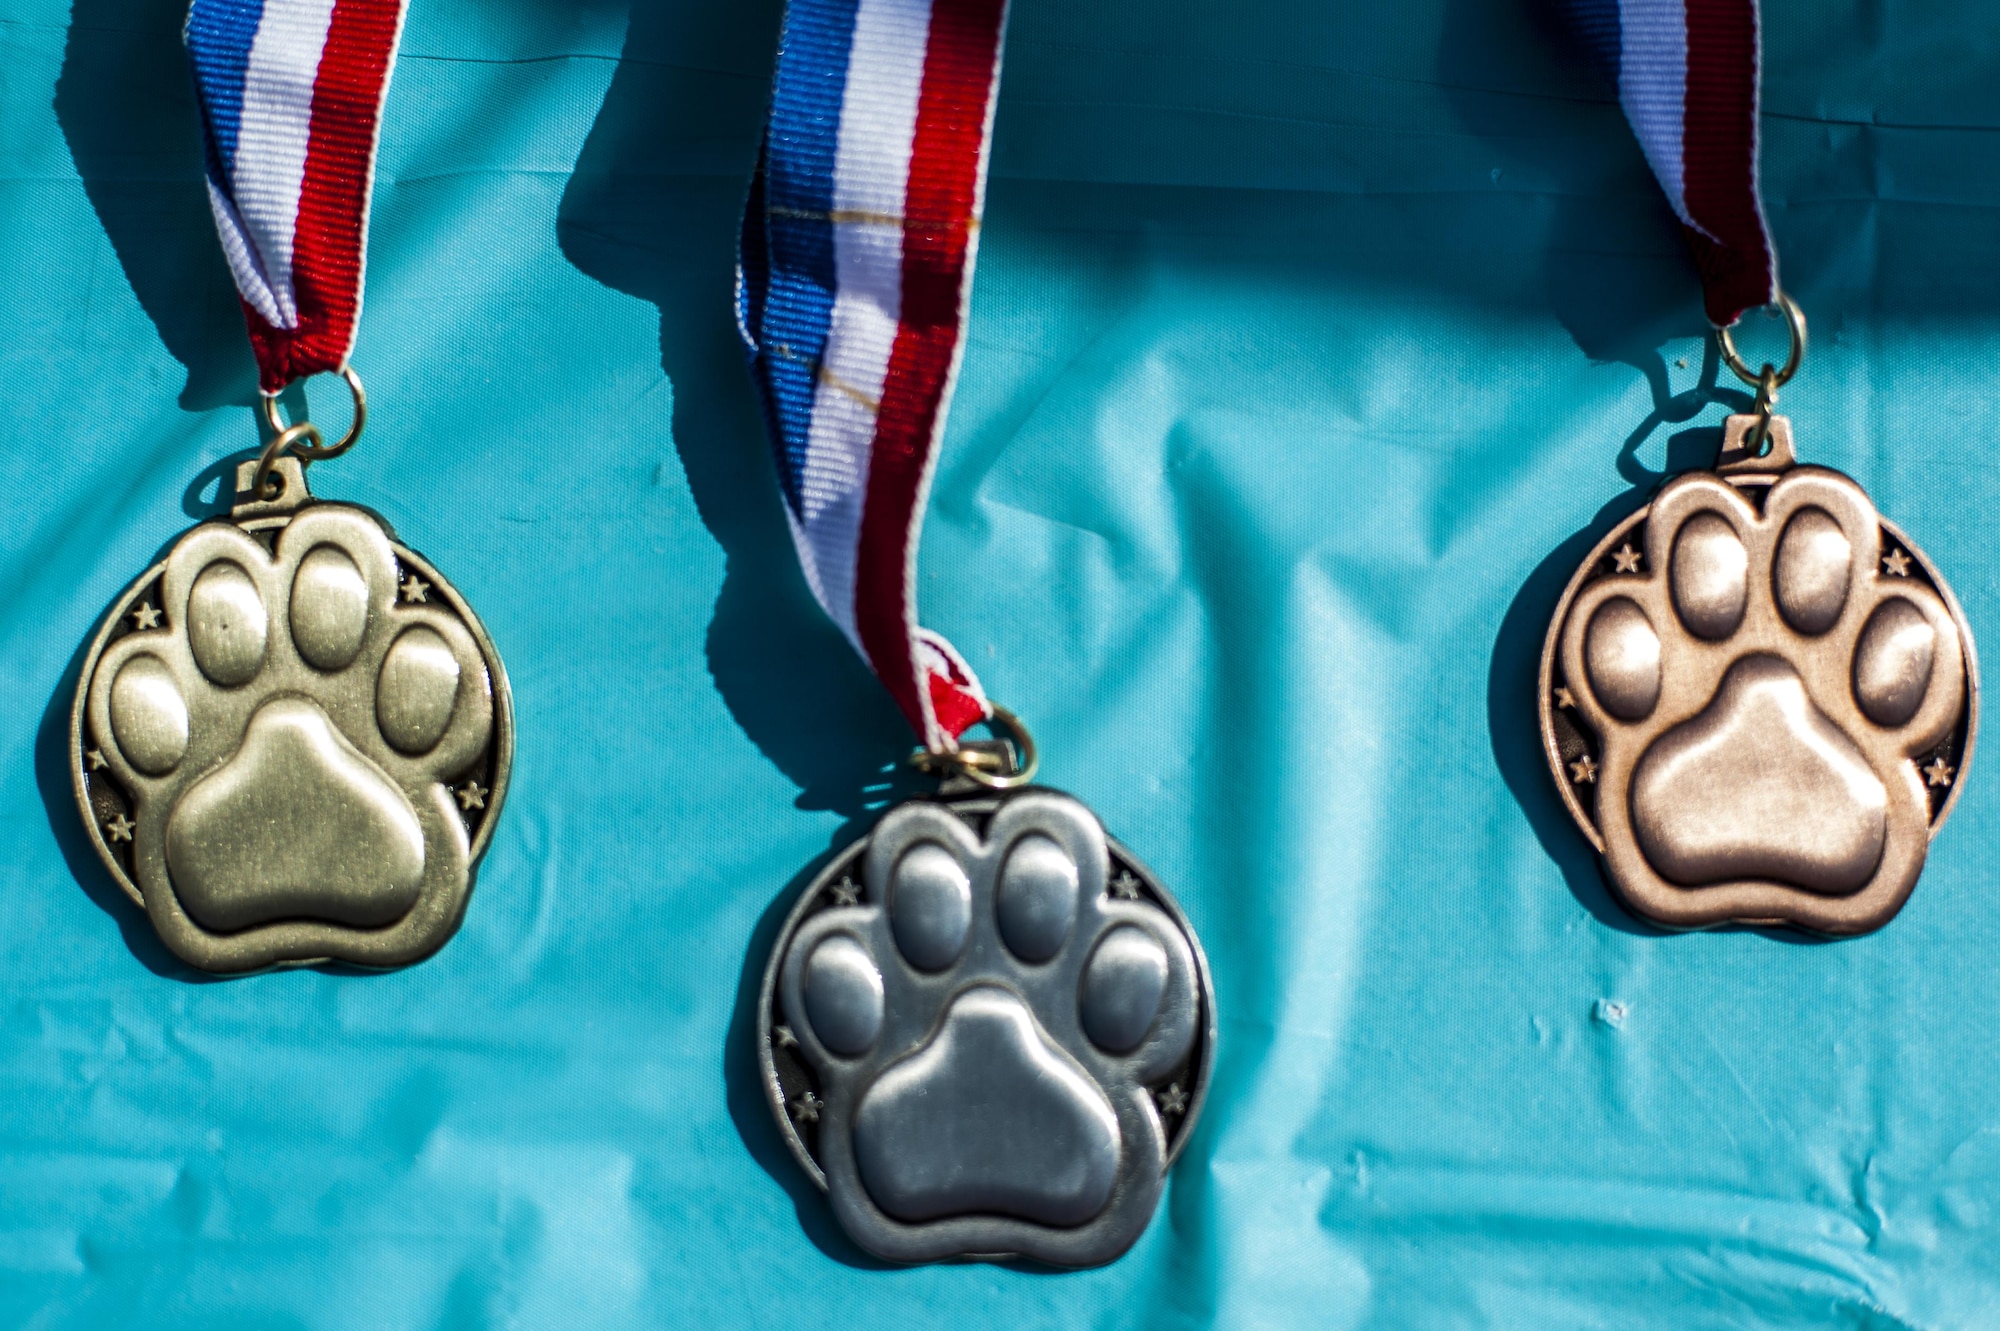 Award medals rest on display during the Family & Furry Friends 5k, March 5, 2016, at Moody Air Force Base, Ga. The medals were awarded to the first three finishing runners: Carson Locke, son of U.S. Air Force Col. Joseph Locke, 93d Air Ground Operations Wing commander, Master Sgt. Jason Bradley, 23d Medical Group family health flight chief, and Boston Boinski, son of Sherri Boinski, 23d Medical Group registered nurse. (U.S. Air Force photo by Airman 1st Class Lauren M. Johnson)
